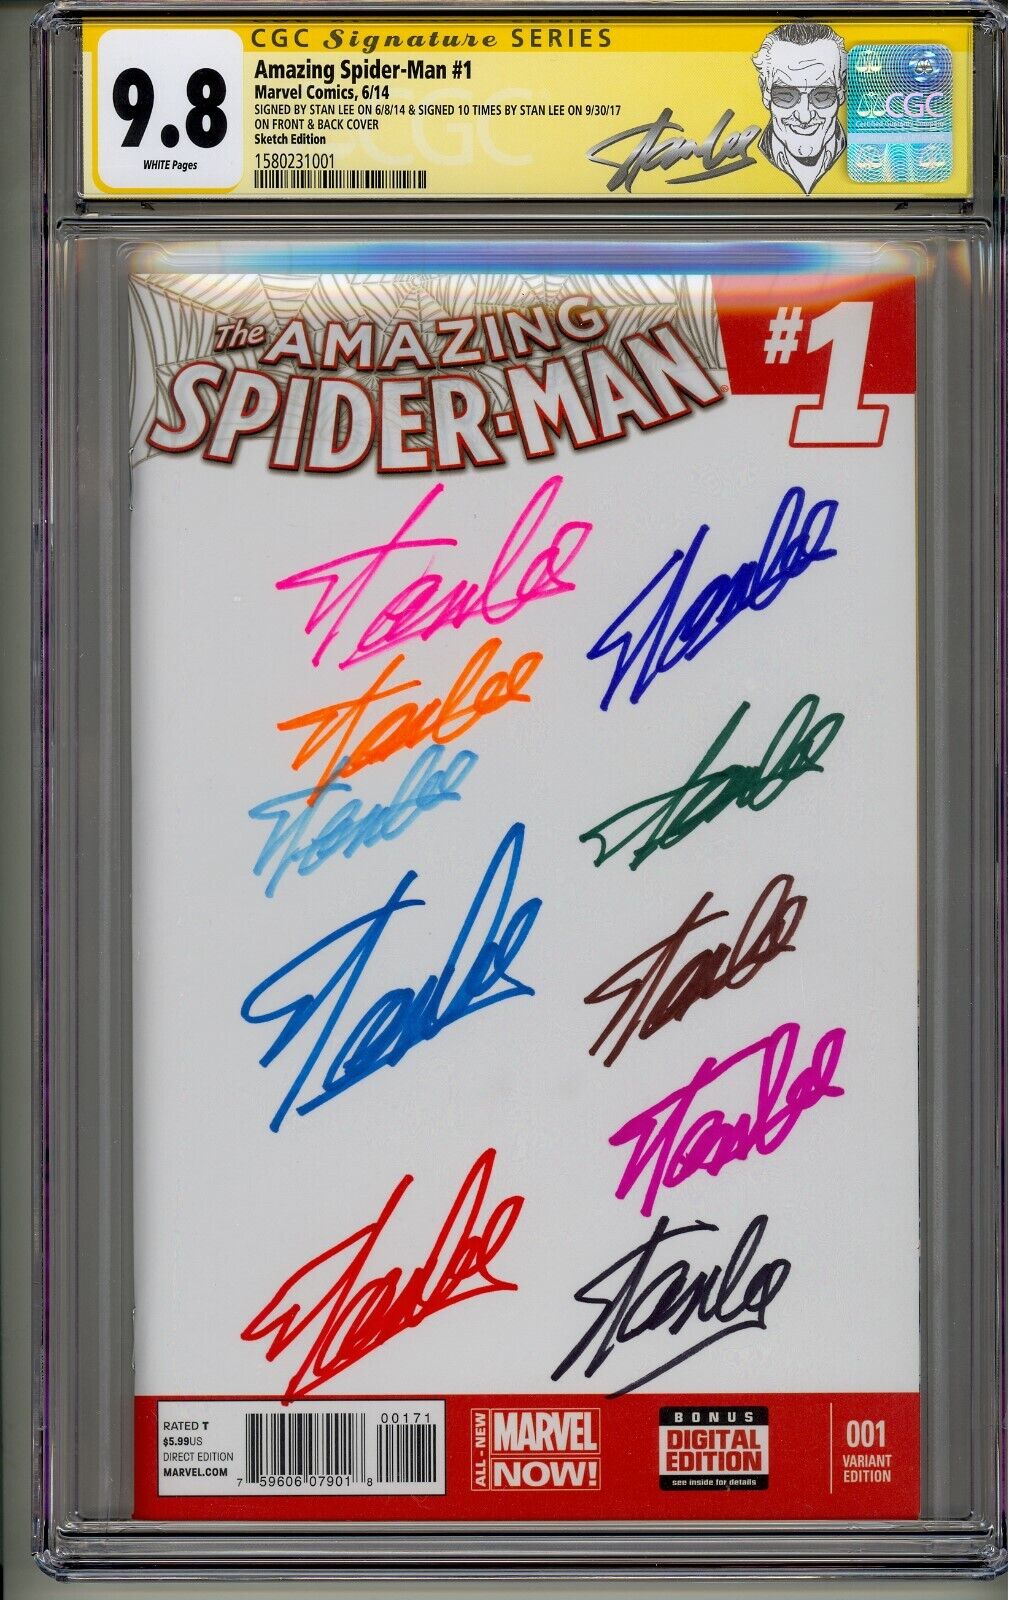 💥AMAZING SPIDER-MAN #1 CGC SS 9.8 STAN LEE SIGNED 11x IN COLORED SHARPIES💥